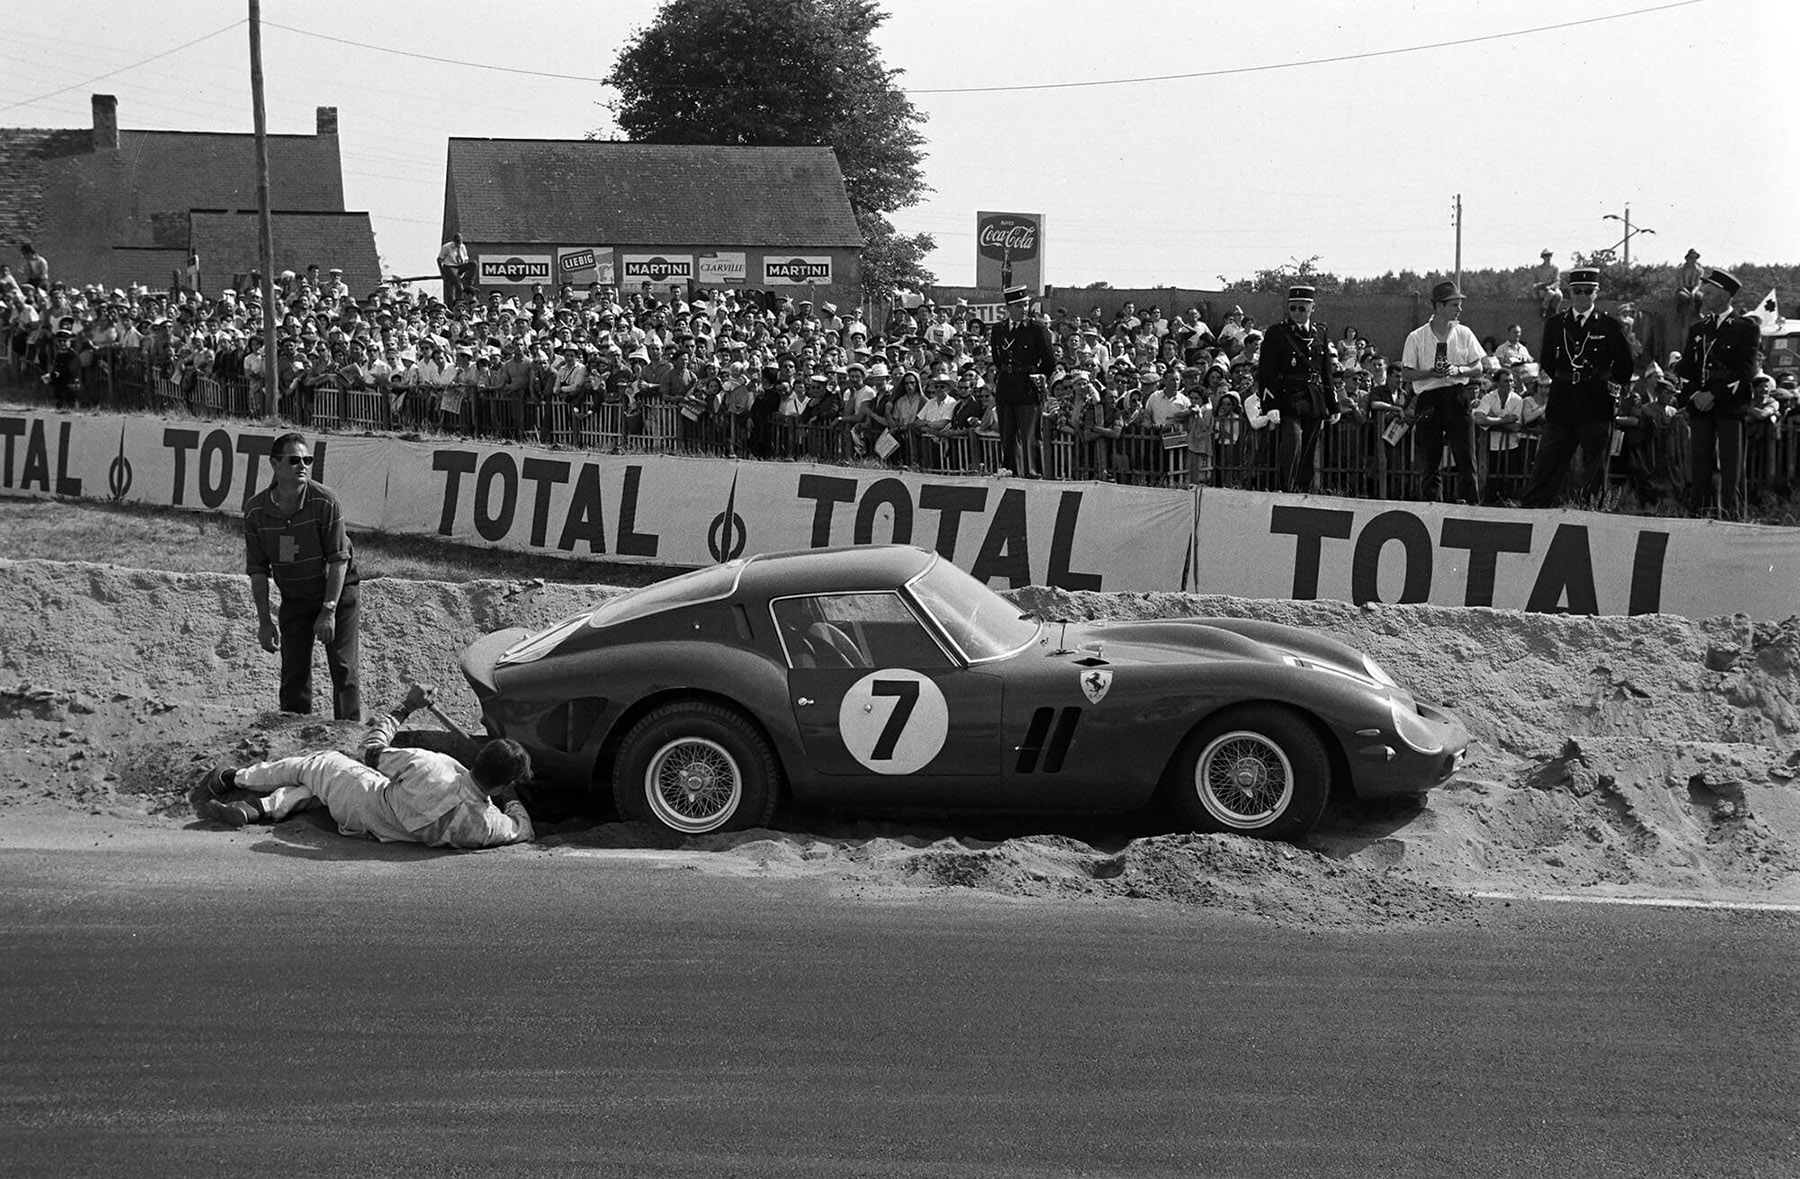 Chassis no. 3765 being dug out of a sand bank during the 24 Hours of Le Mans at Circuit de la Sarthe on 24 June 1962.